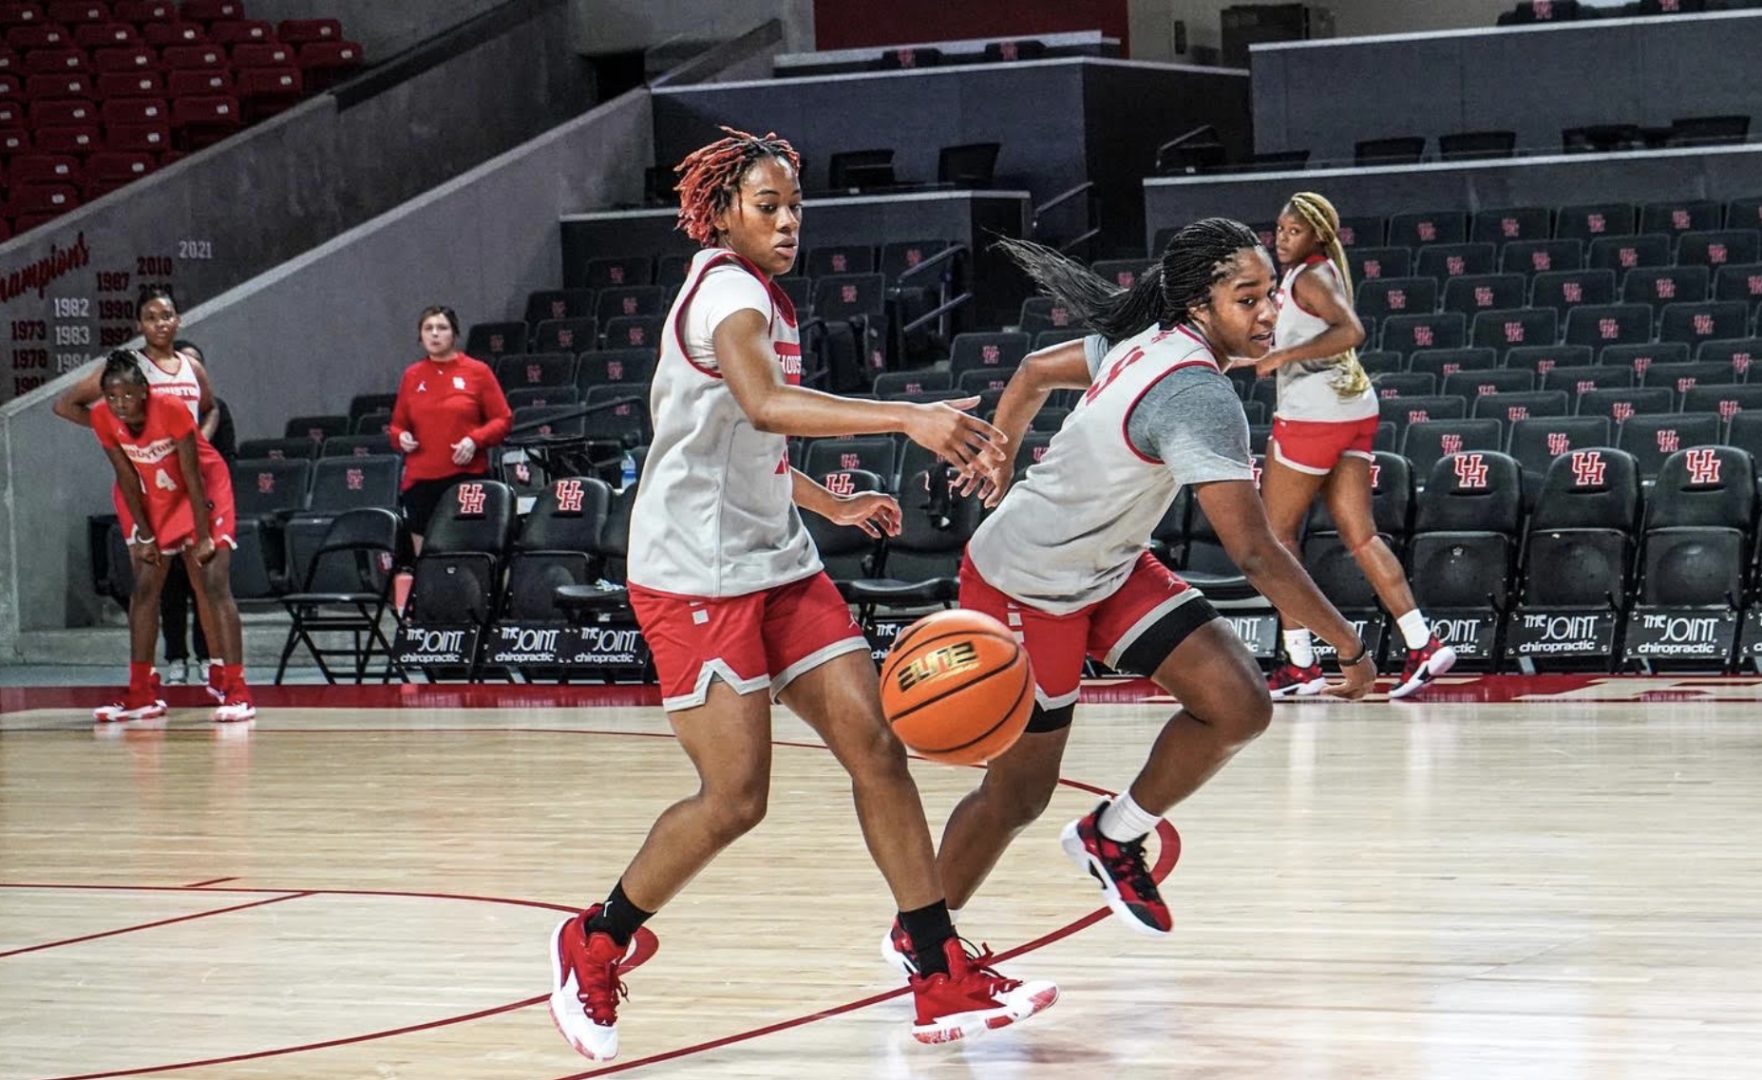 The UH women's basketball team prepares for the 2021-22 season during a recent practice. | Courtesy of Jayda Hill